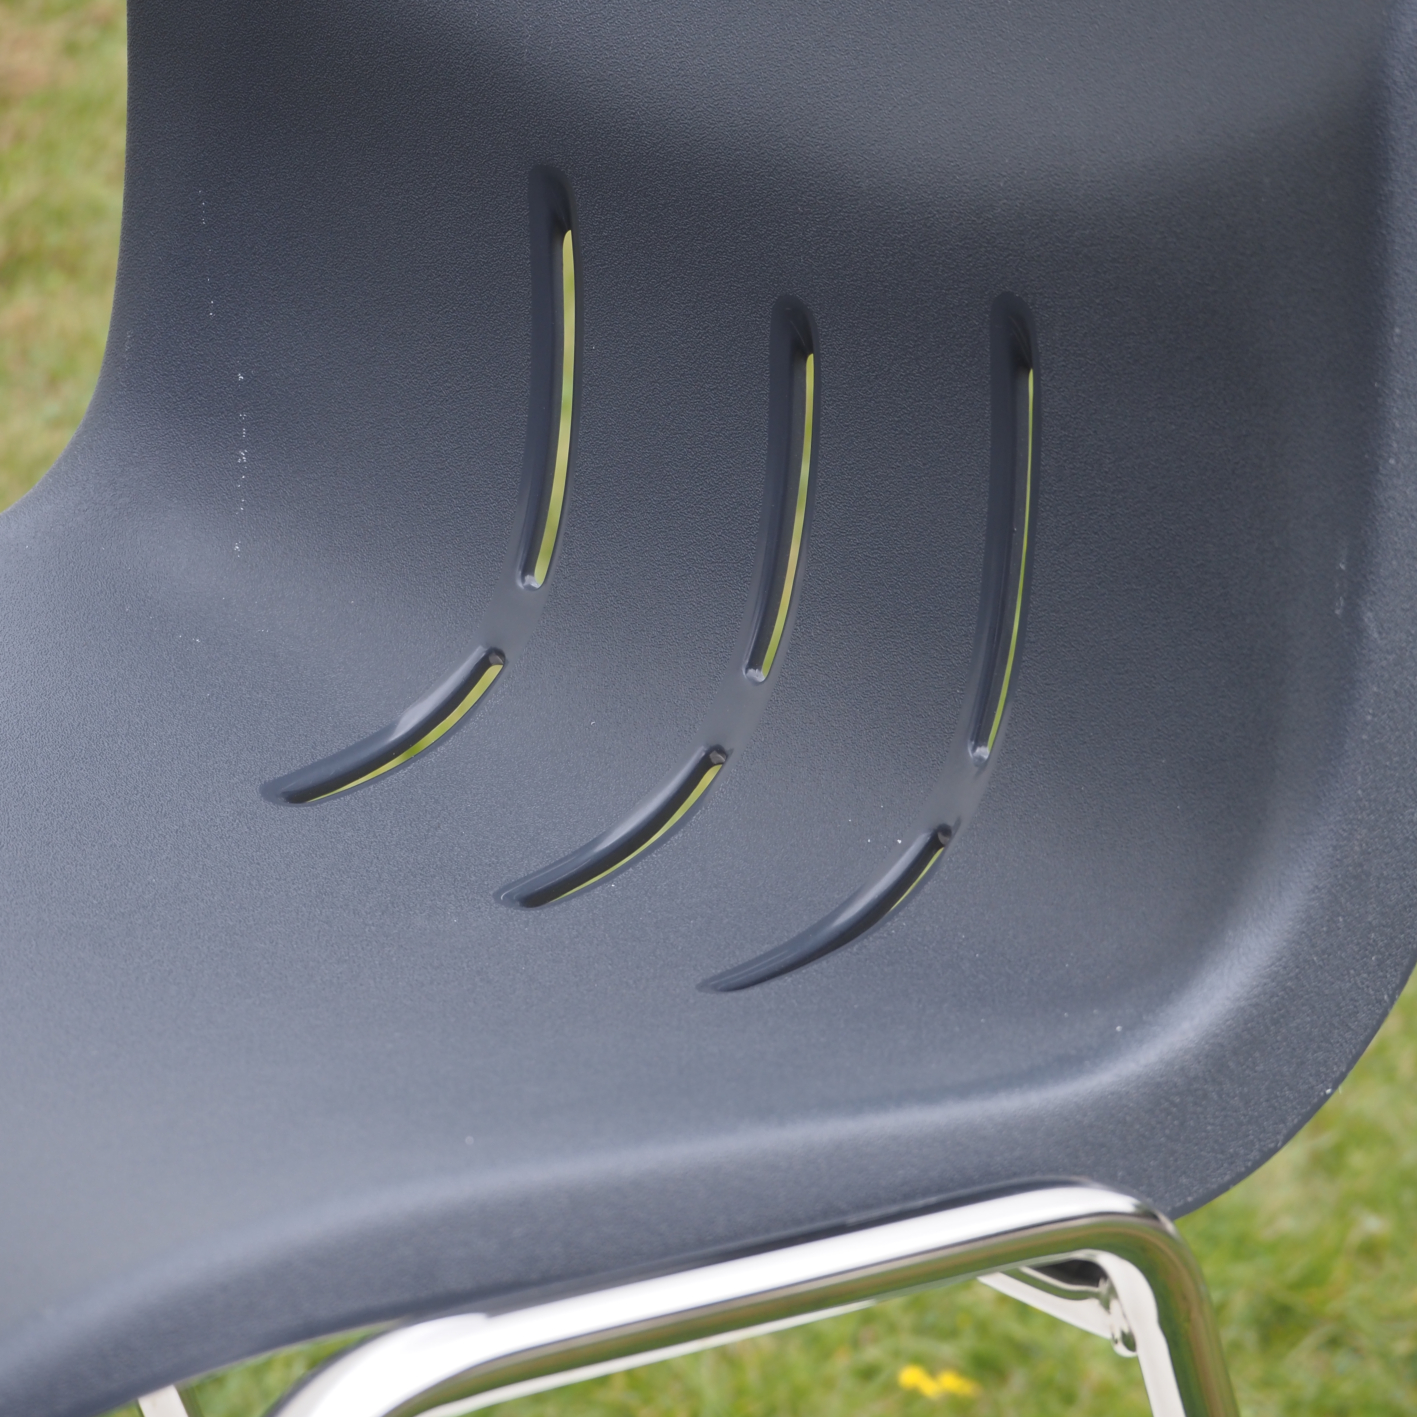 Stackable chair with anthracite polypropylene shell and tubular steel legs